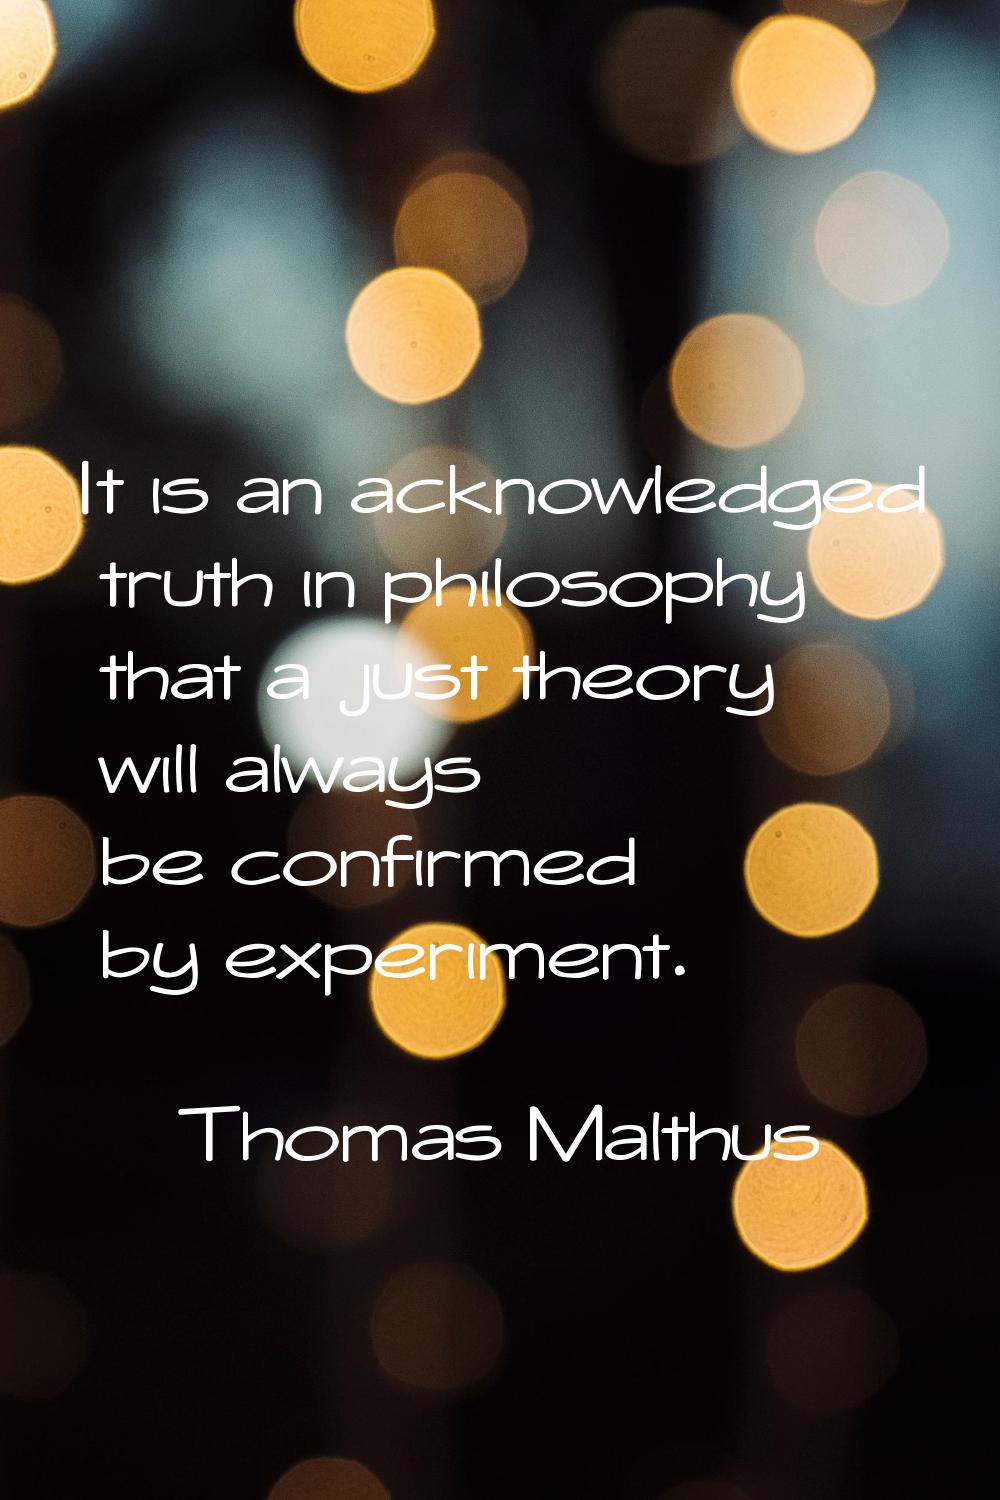 It is an acknowledged truth in philosophy that a just theory will always be confirmed by experiment